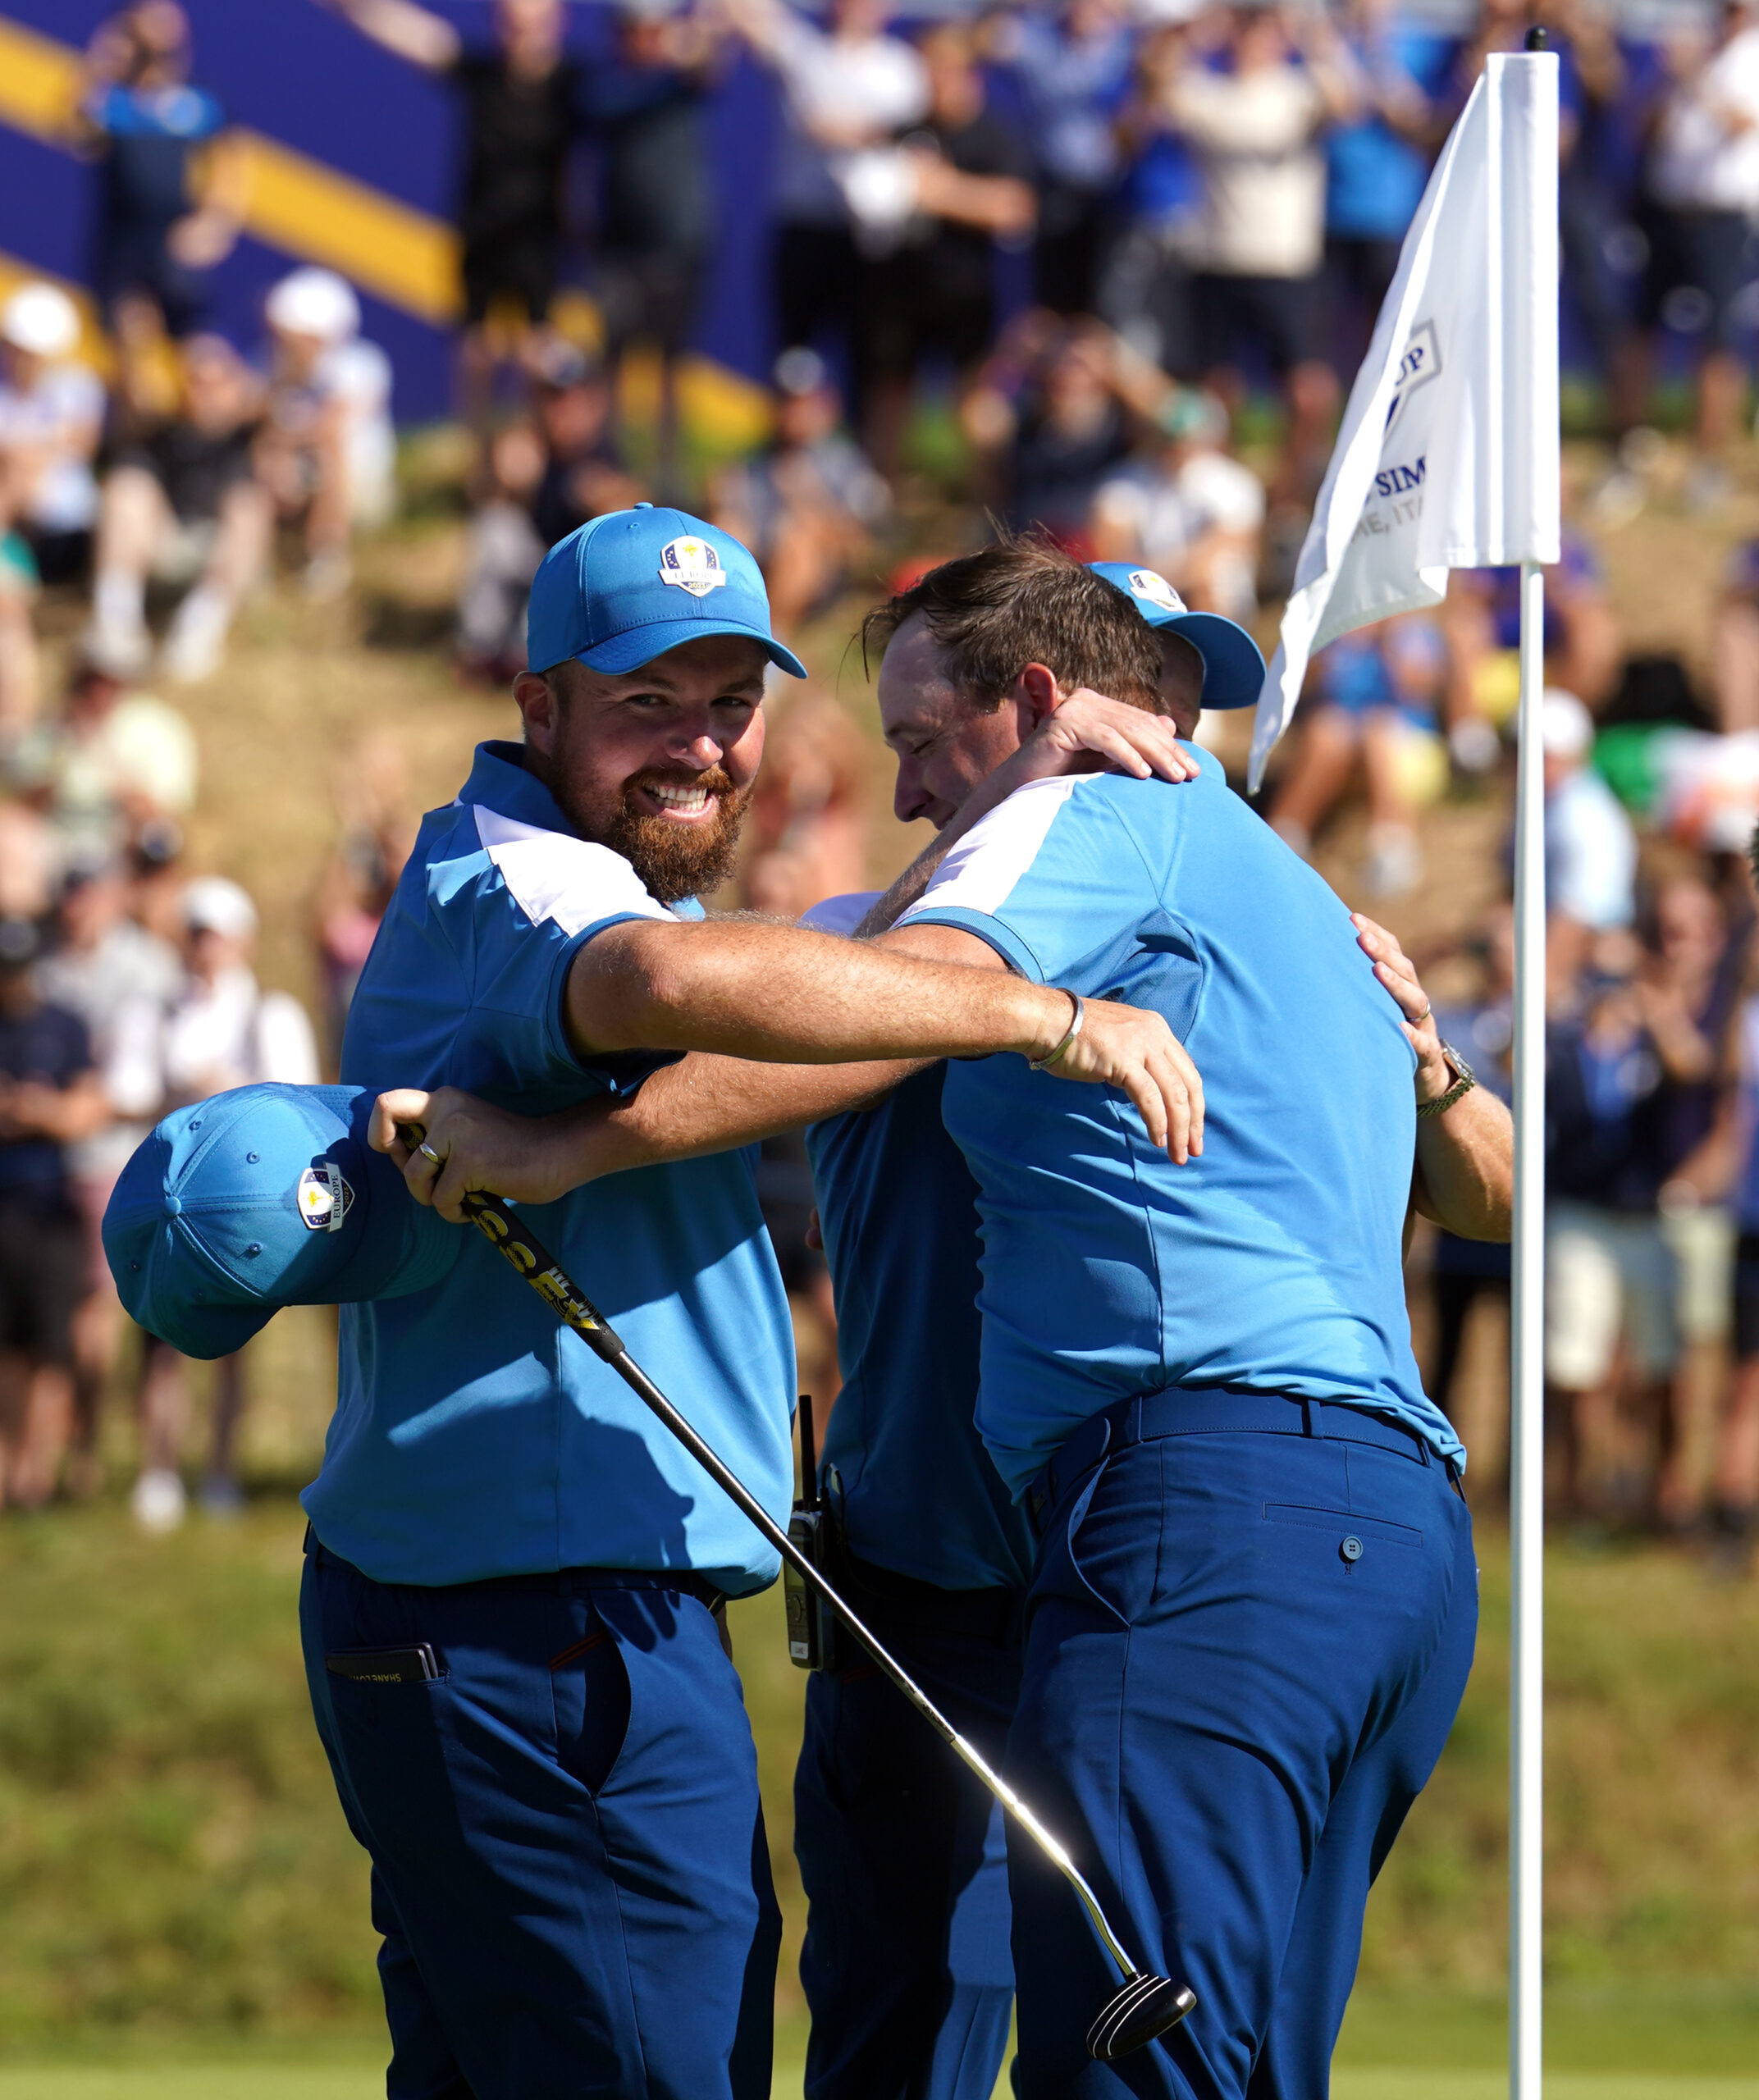 Shane Lowry helped Europe make a dream start on the opening morning of the Ryder Cup